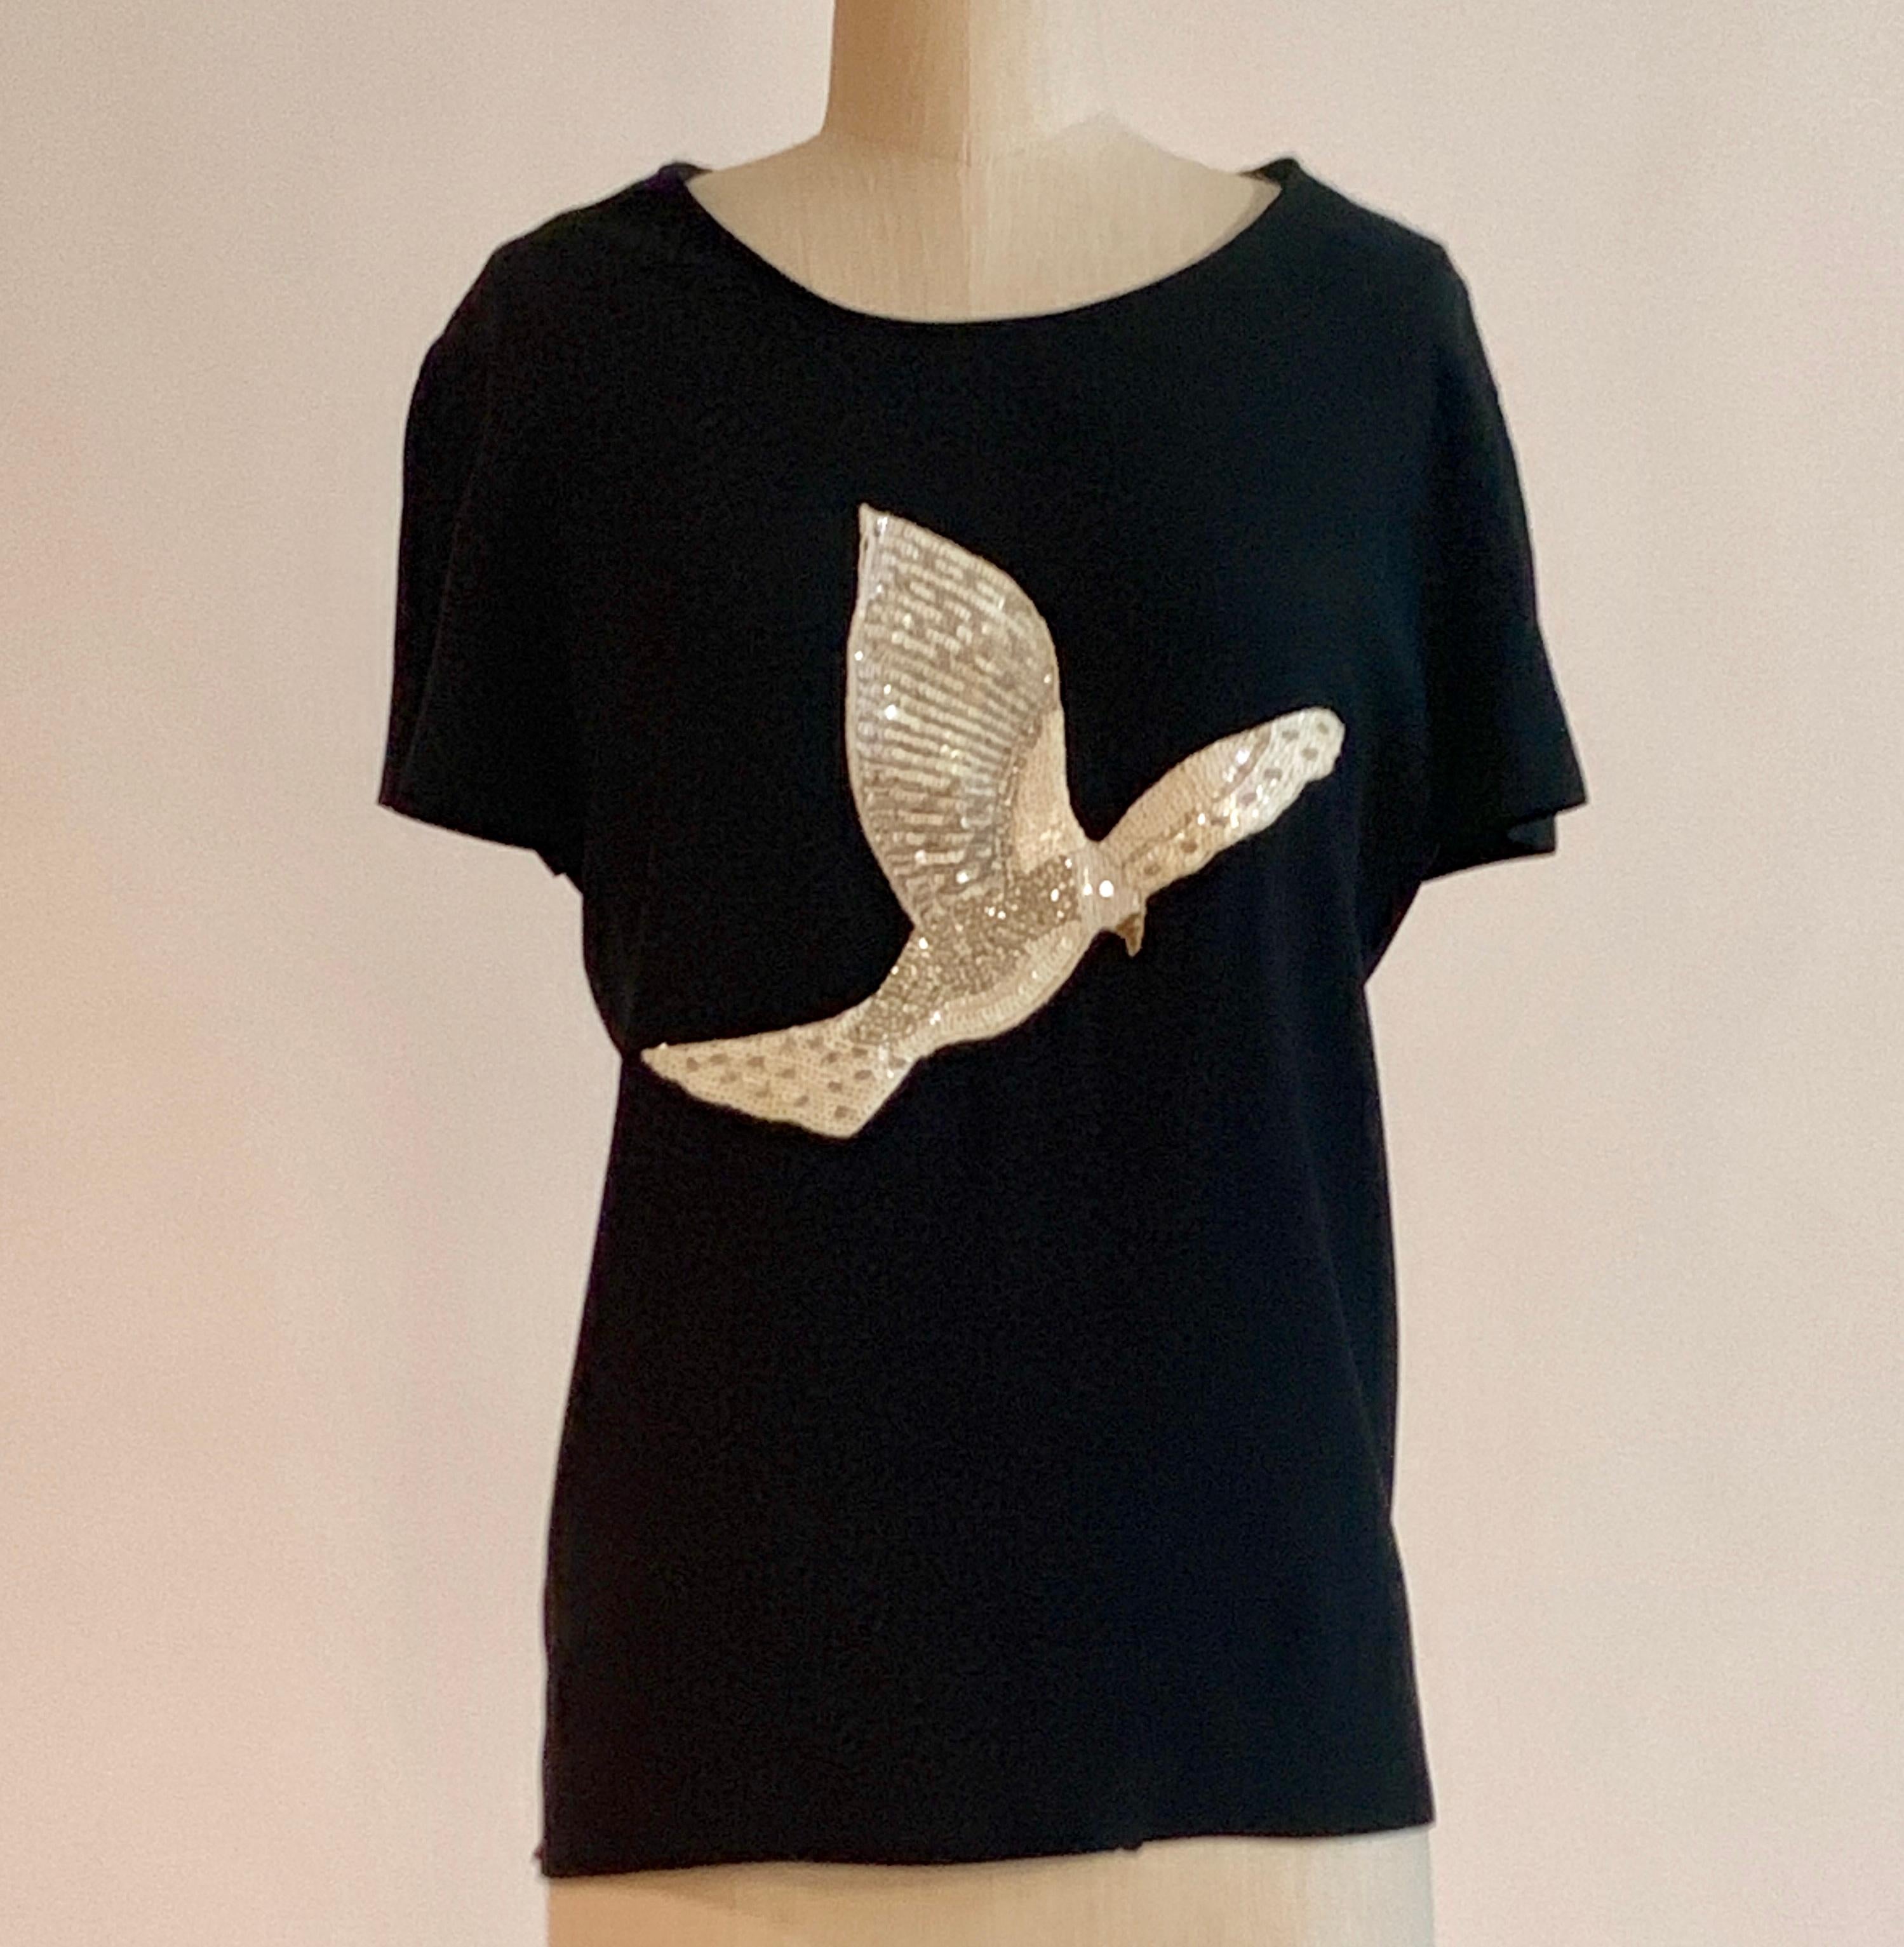 Vintage Moschino Couture 1980s dark navy (almost black) short sleeve blouse with cream, white, silver and gold sequin and bead dove at front.  Pull on style with no closures. 

55% acetate, 45% rayon.

Made in Italy.

Labelled size IT 44, US 10.